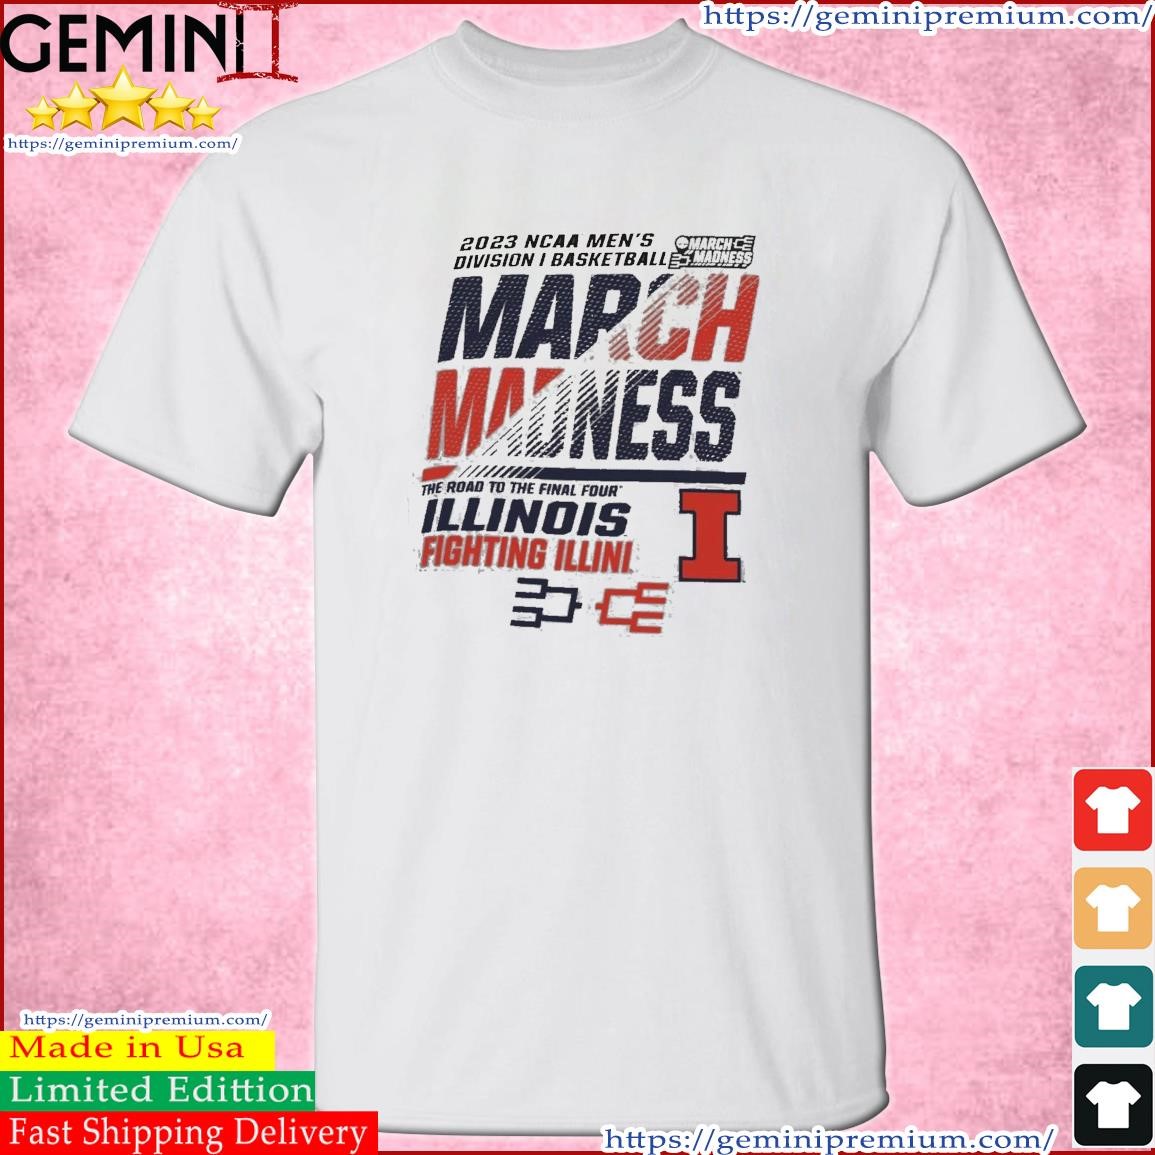 Illinois Men's Basketball 2023 NCAA March Madness The Road To Final Four Shirt